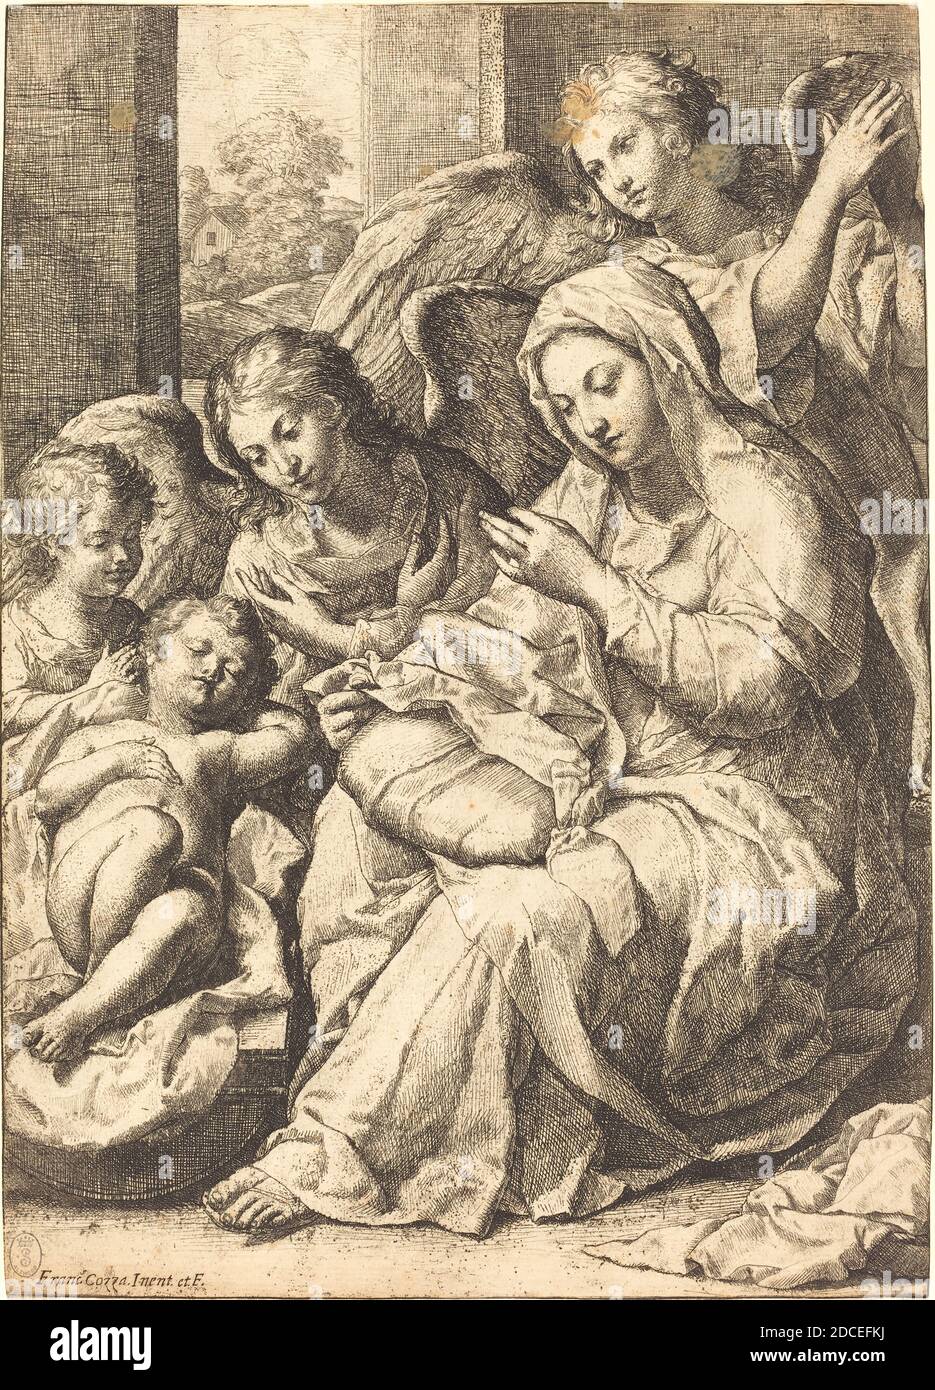 Francesco Cozza, (artist), Italian, 1605 - 1682, Virgin and Angels Watching Over the Sleeping Infant Jesus, etching in black, sheet: 30.3 x 21.7 cm (11 15/16 x 8 9/16 in Stock Photo